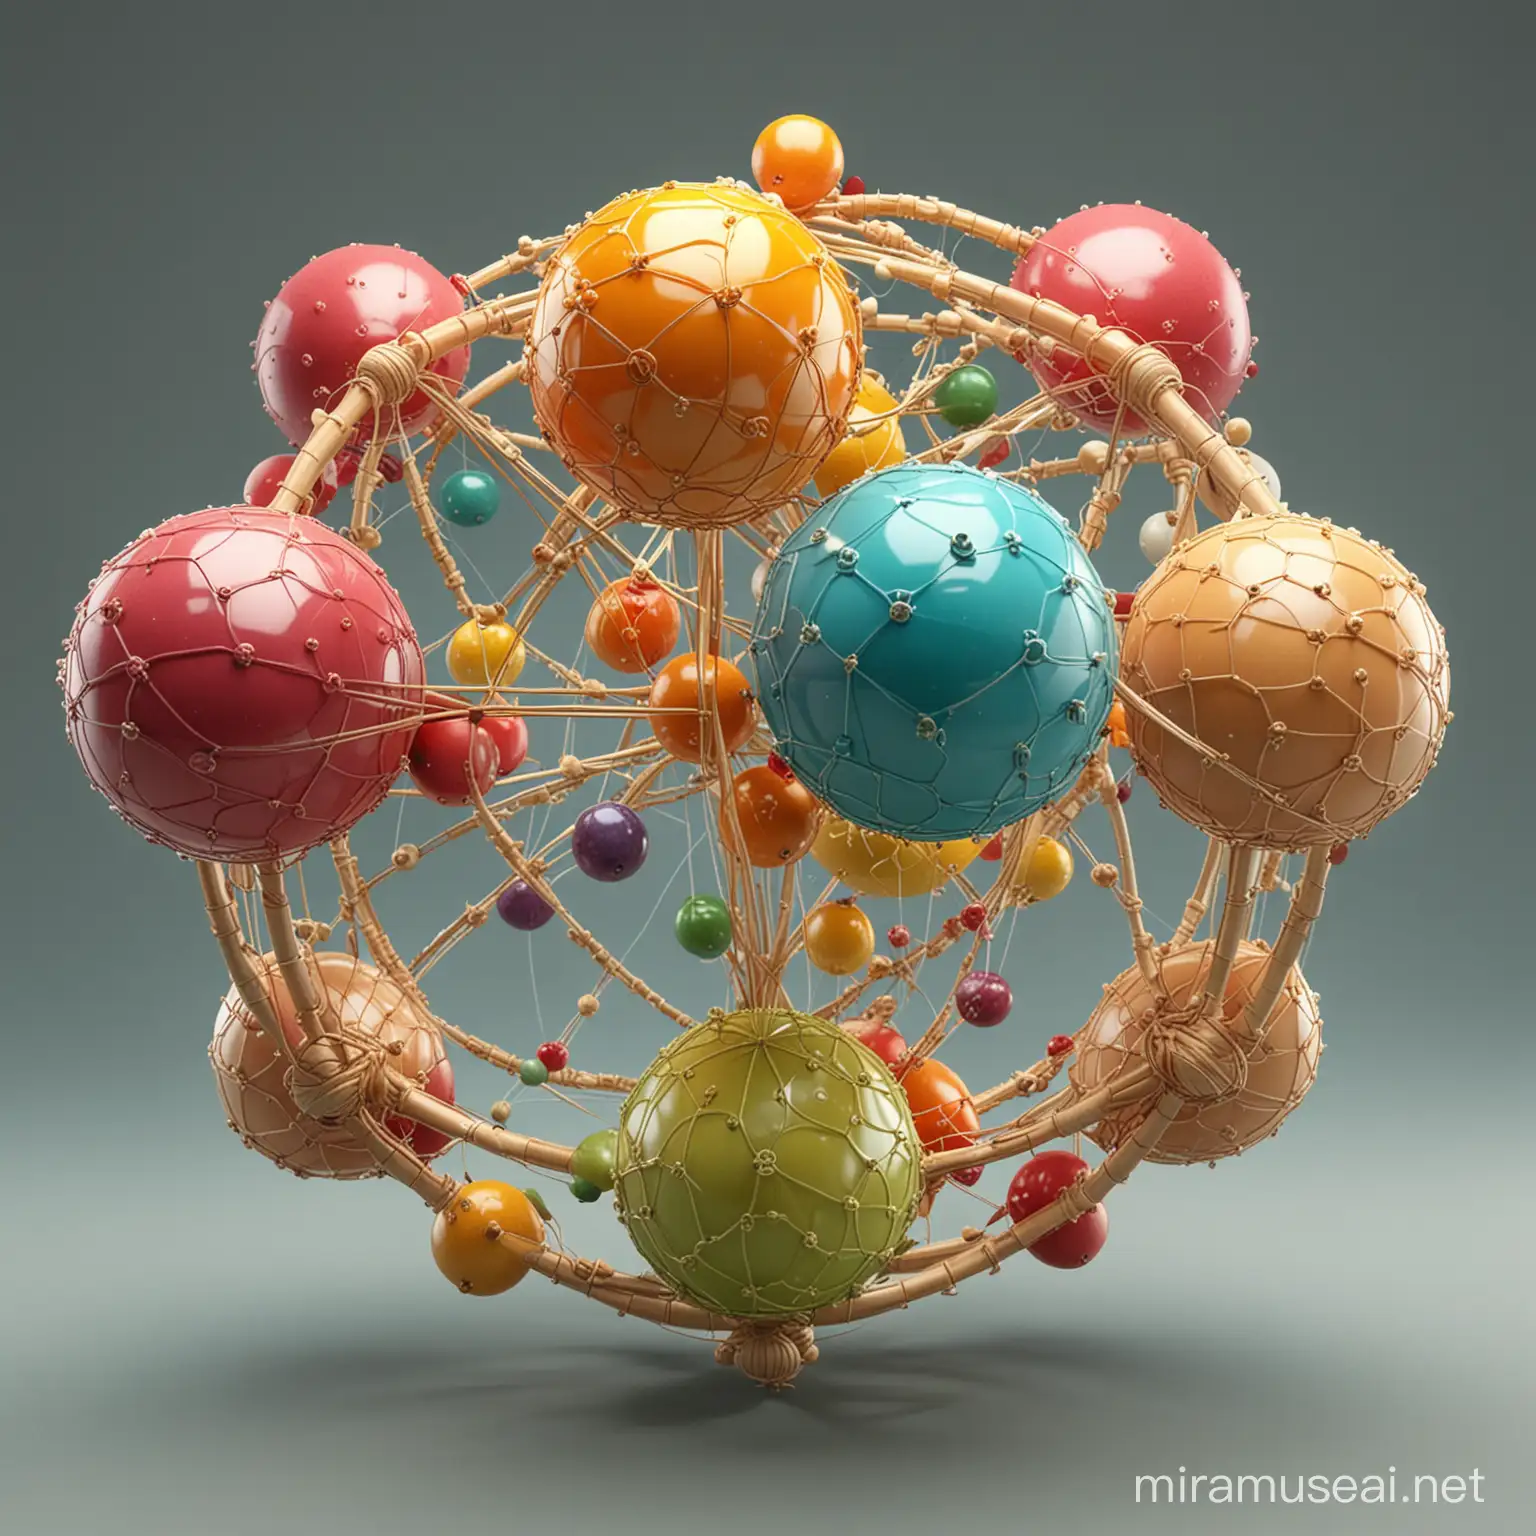 create a three-dimensional array of 13 overlapping spheres, creating the fruit of life.